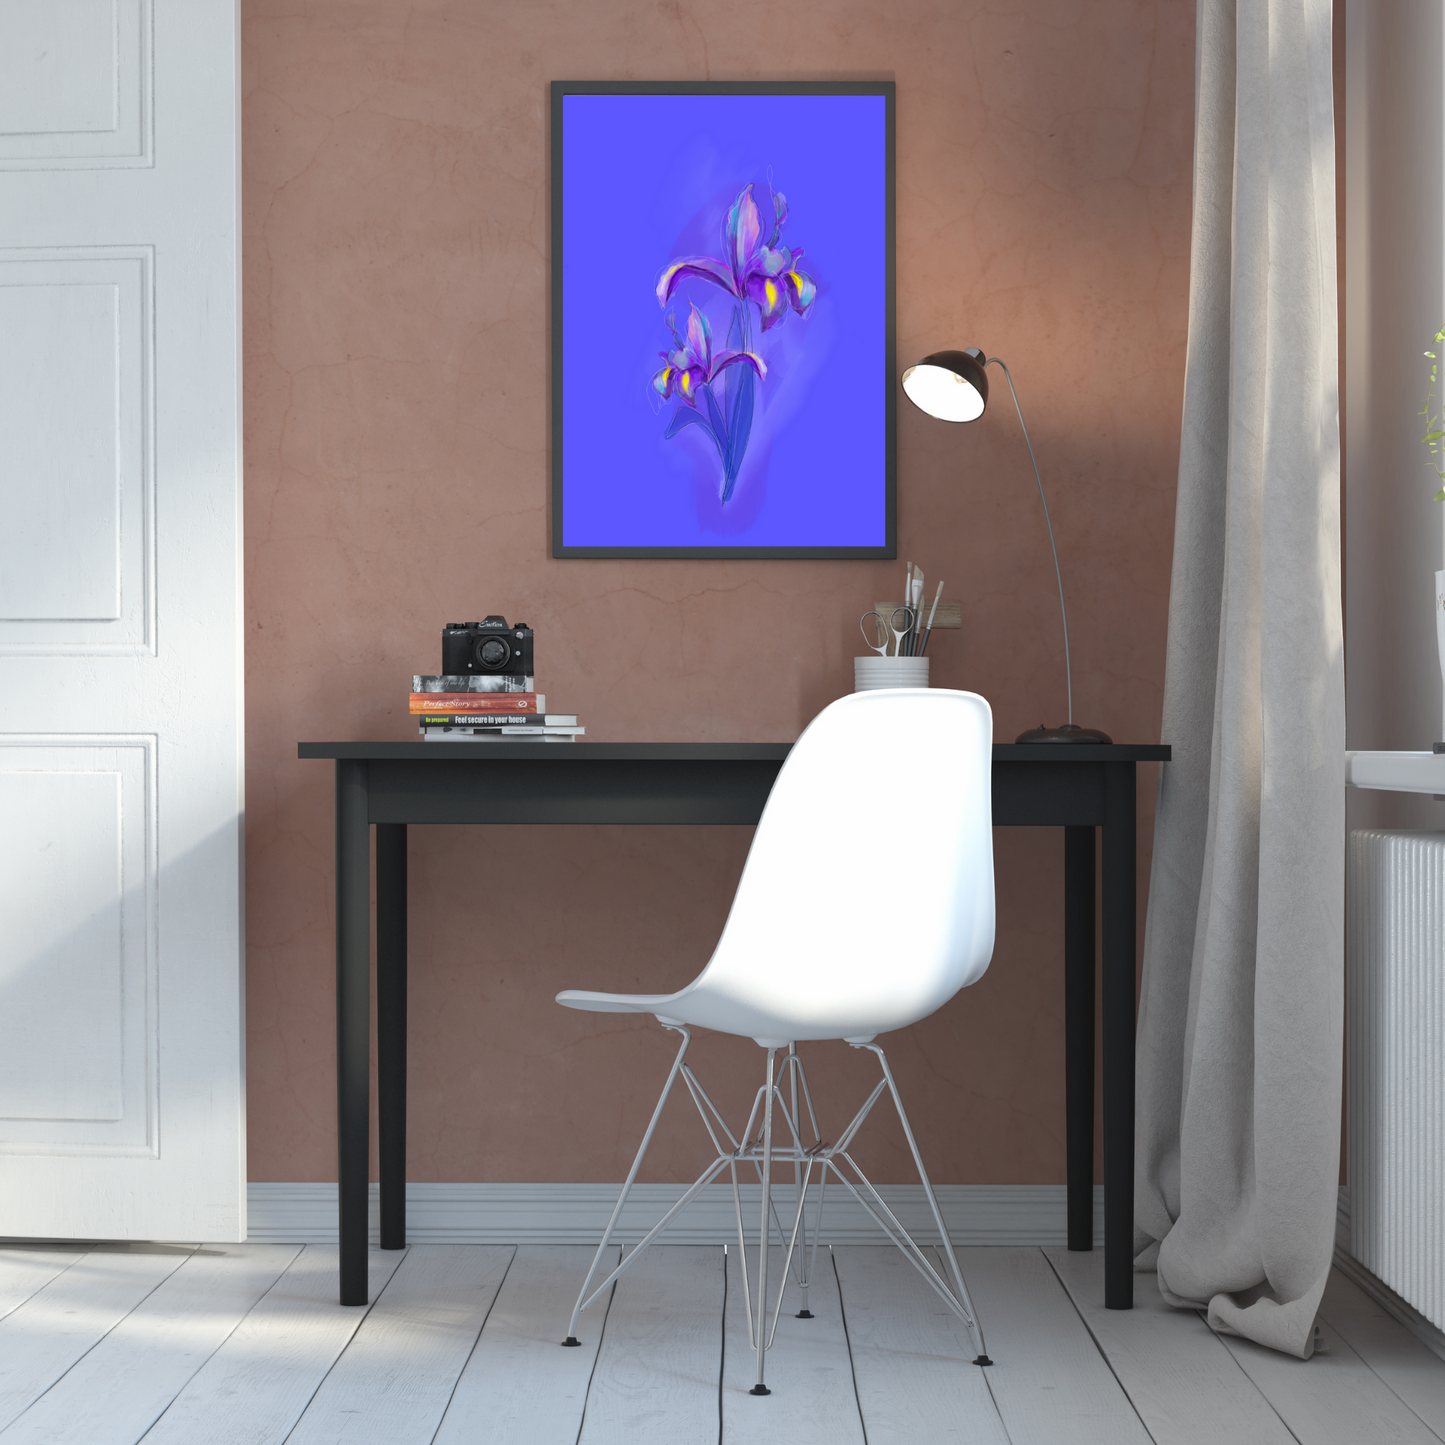 An example of the Iris painting by ArisaTeam over a desk with books and a lamp